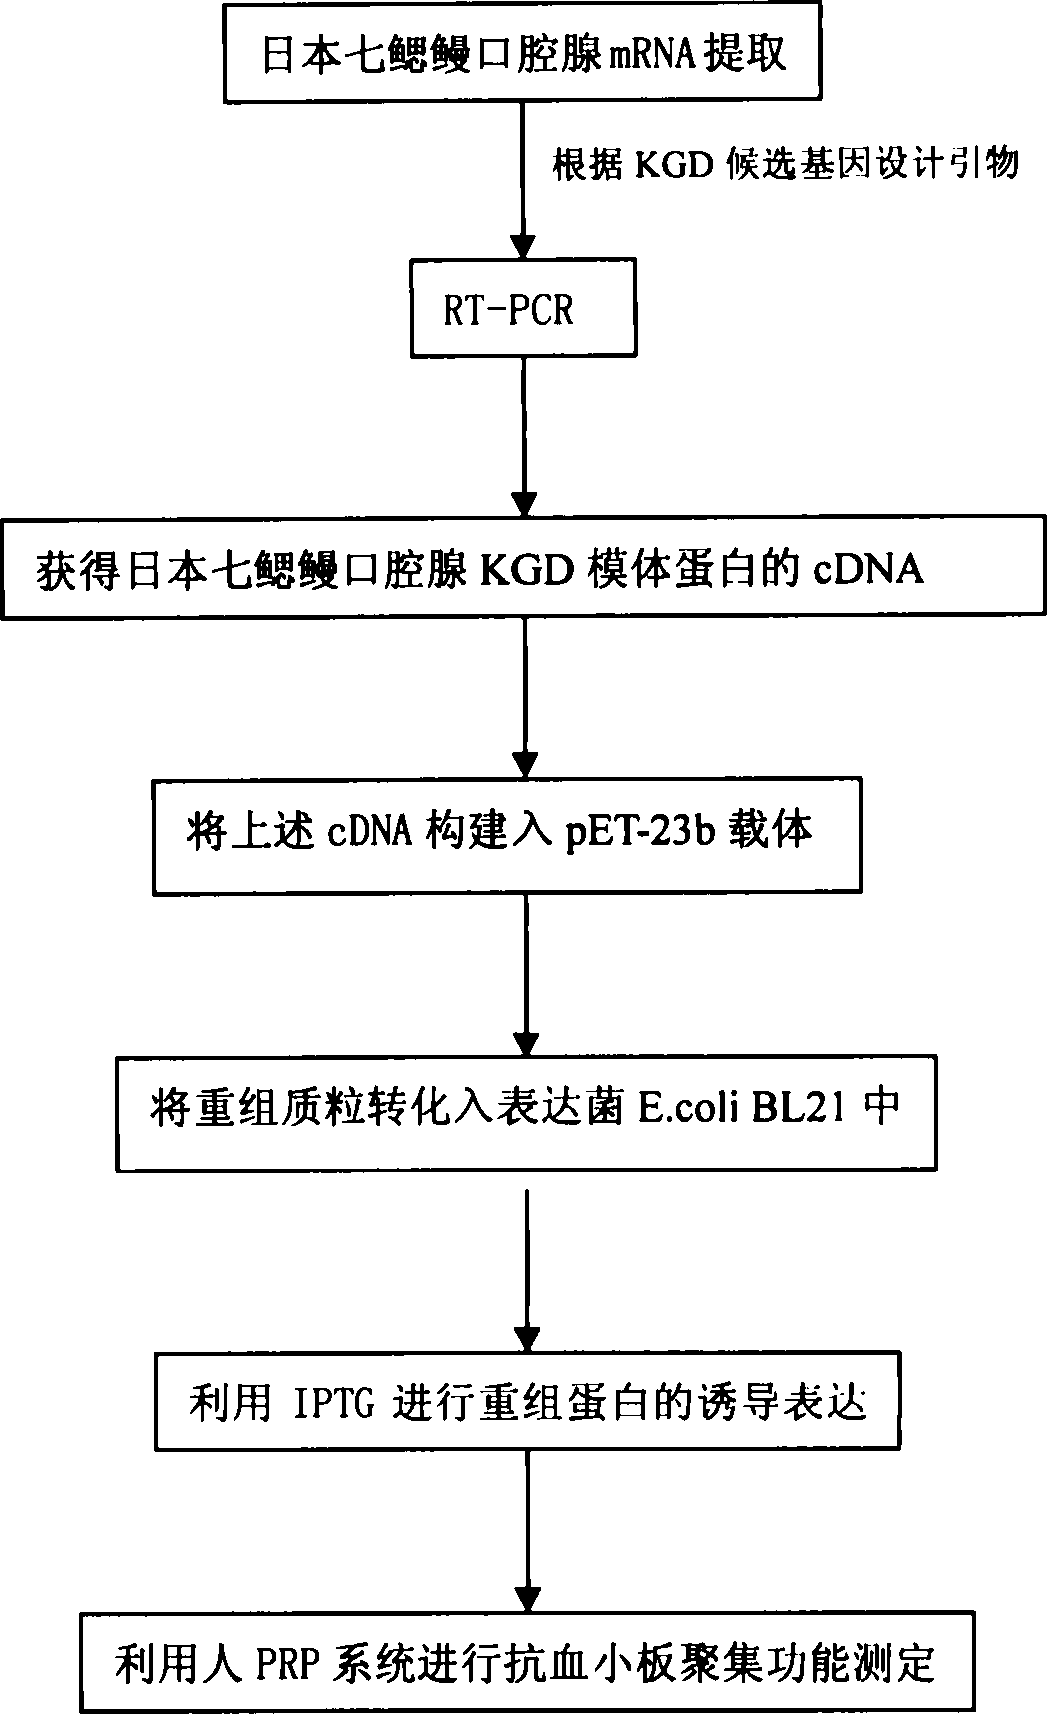 Gene clone of and expression Japan lamprey oral cavity gland KGD model protein possessing anti thrombotic action